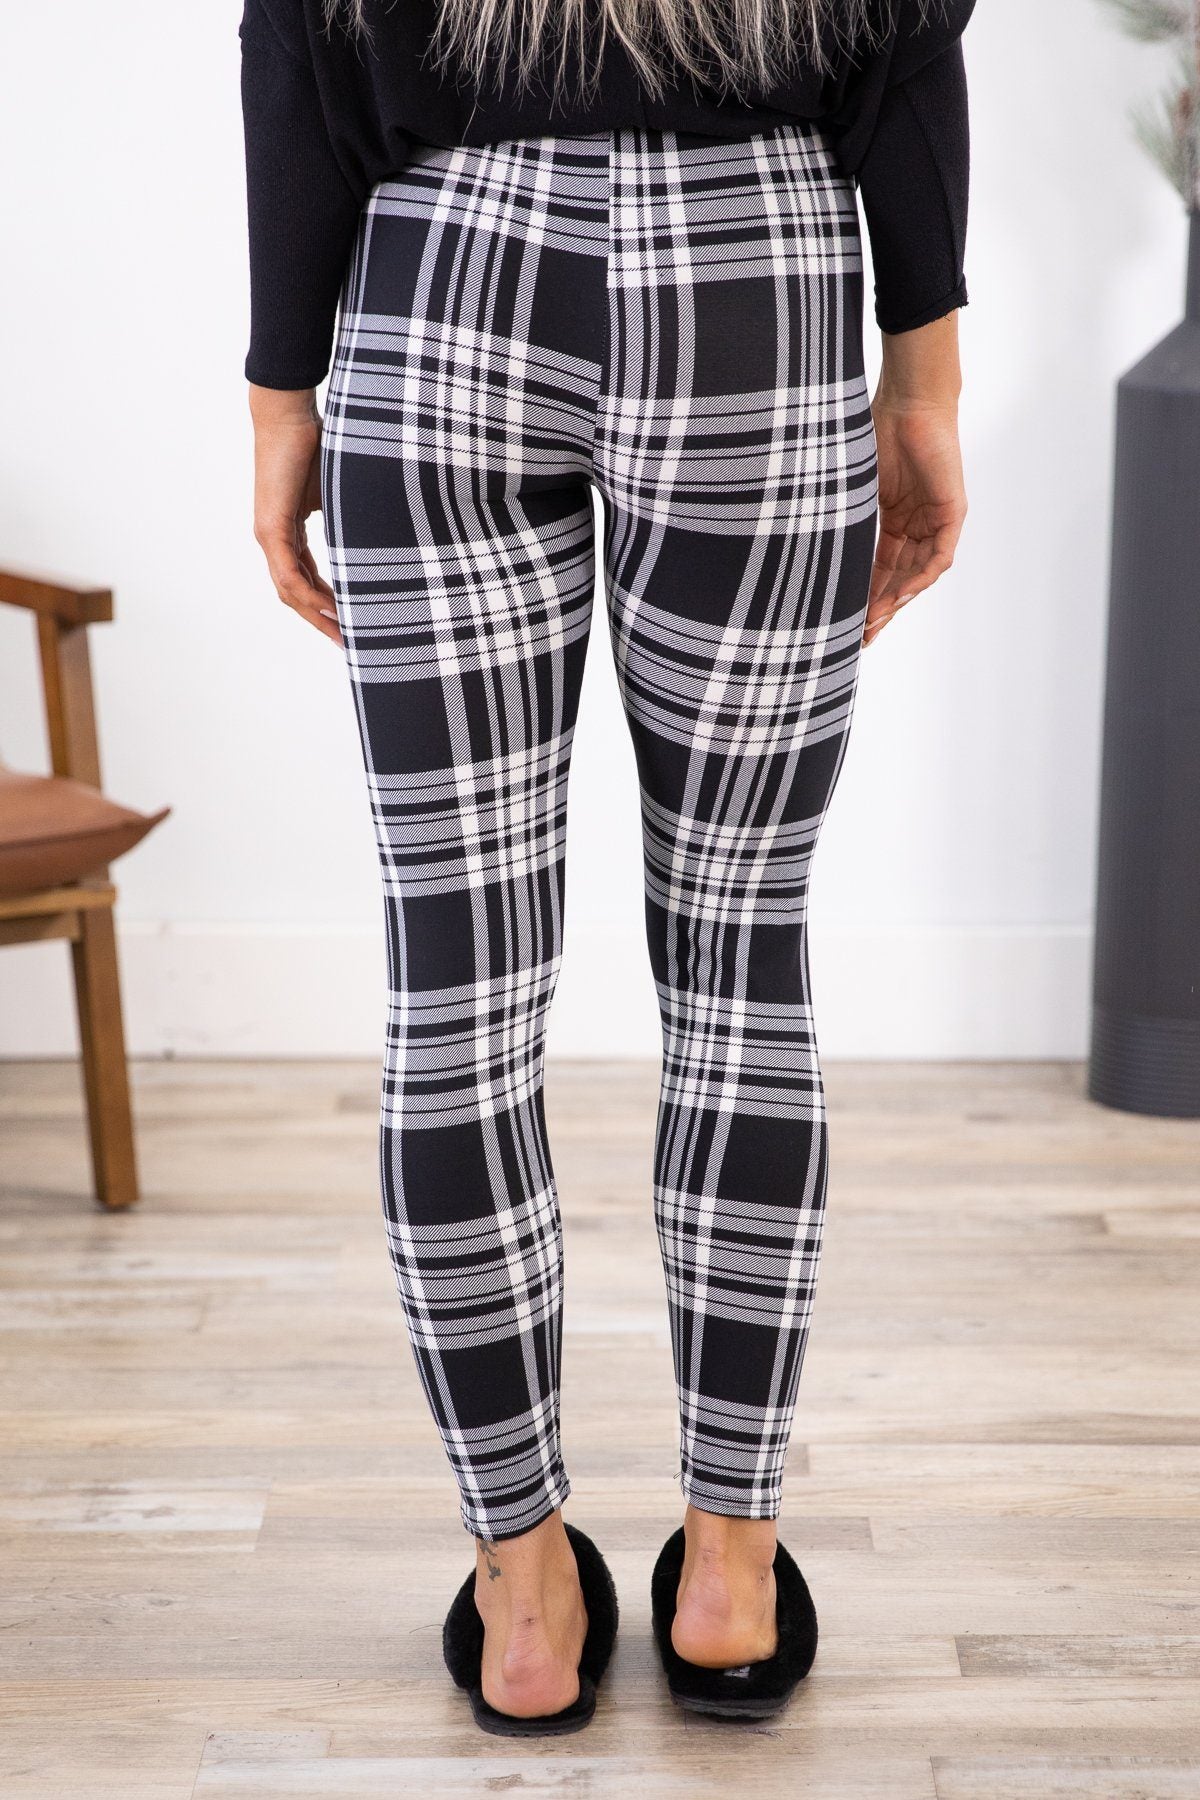 Black and White Plaid Leggings - Filly Flair